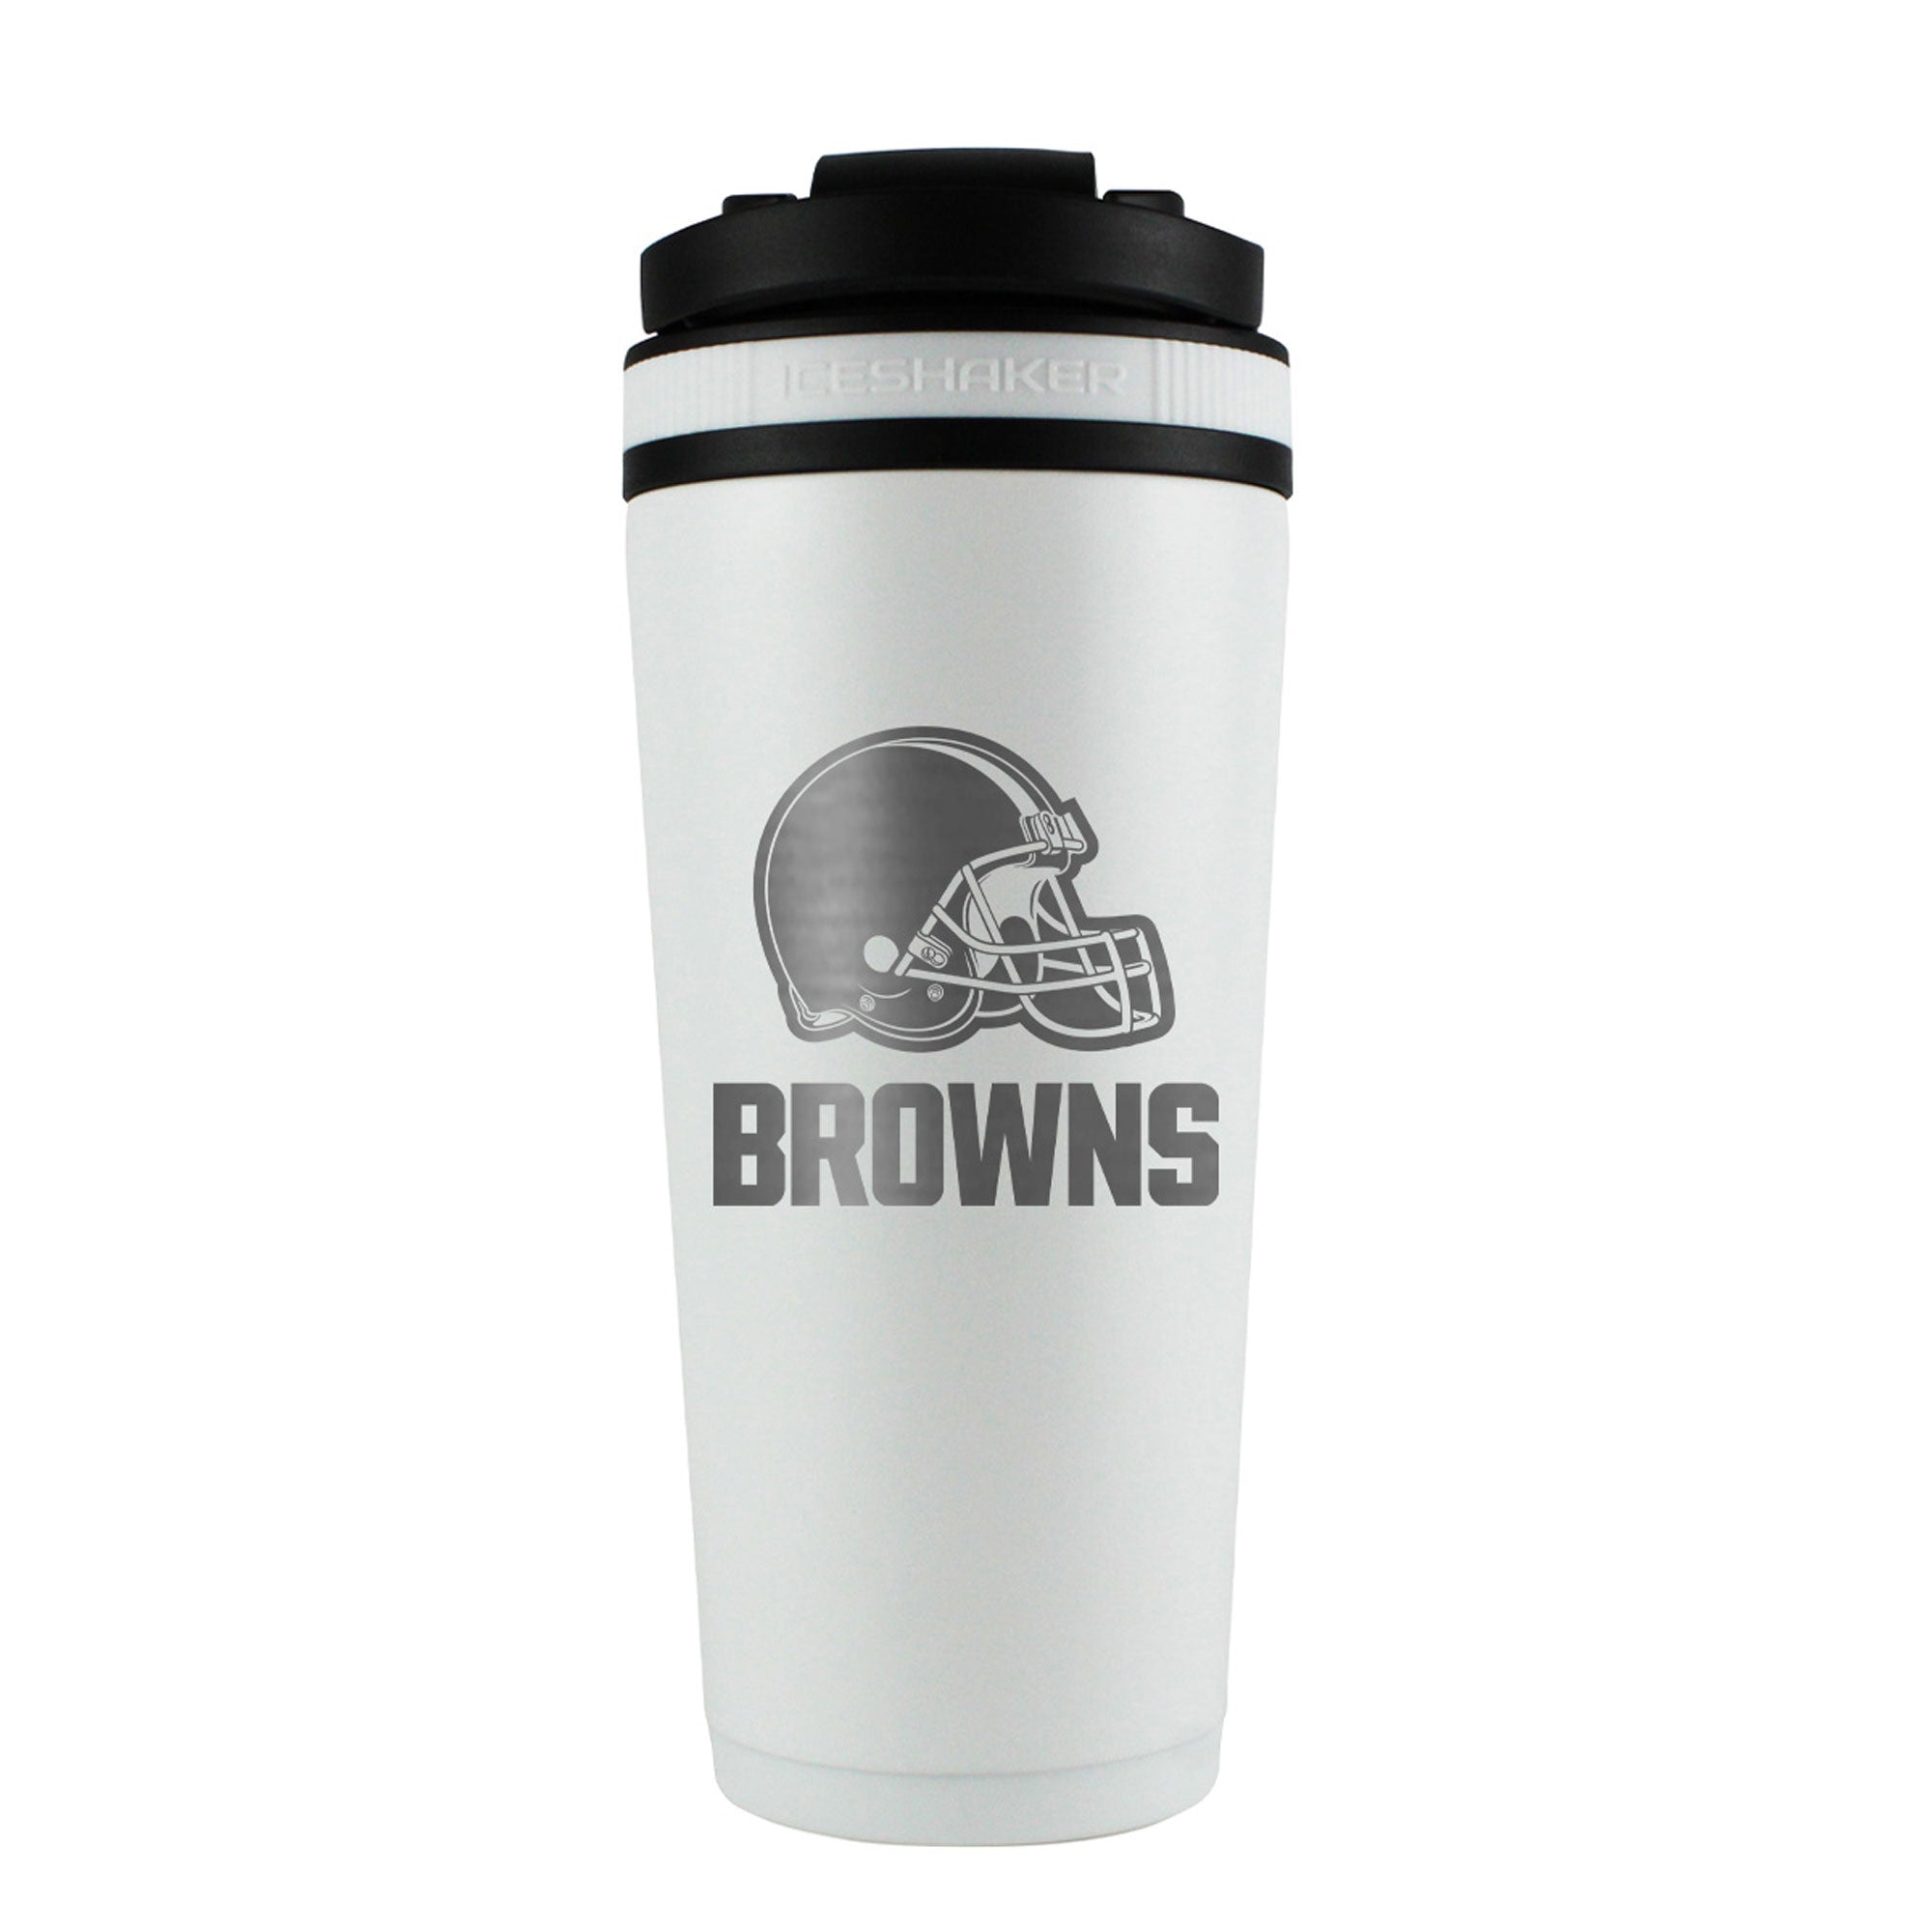 Officially Licensed Cleveland Browns 26oz Ice Shaker - White